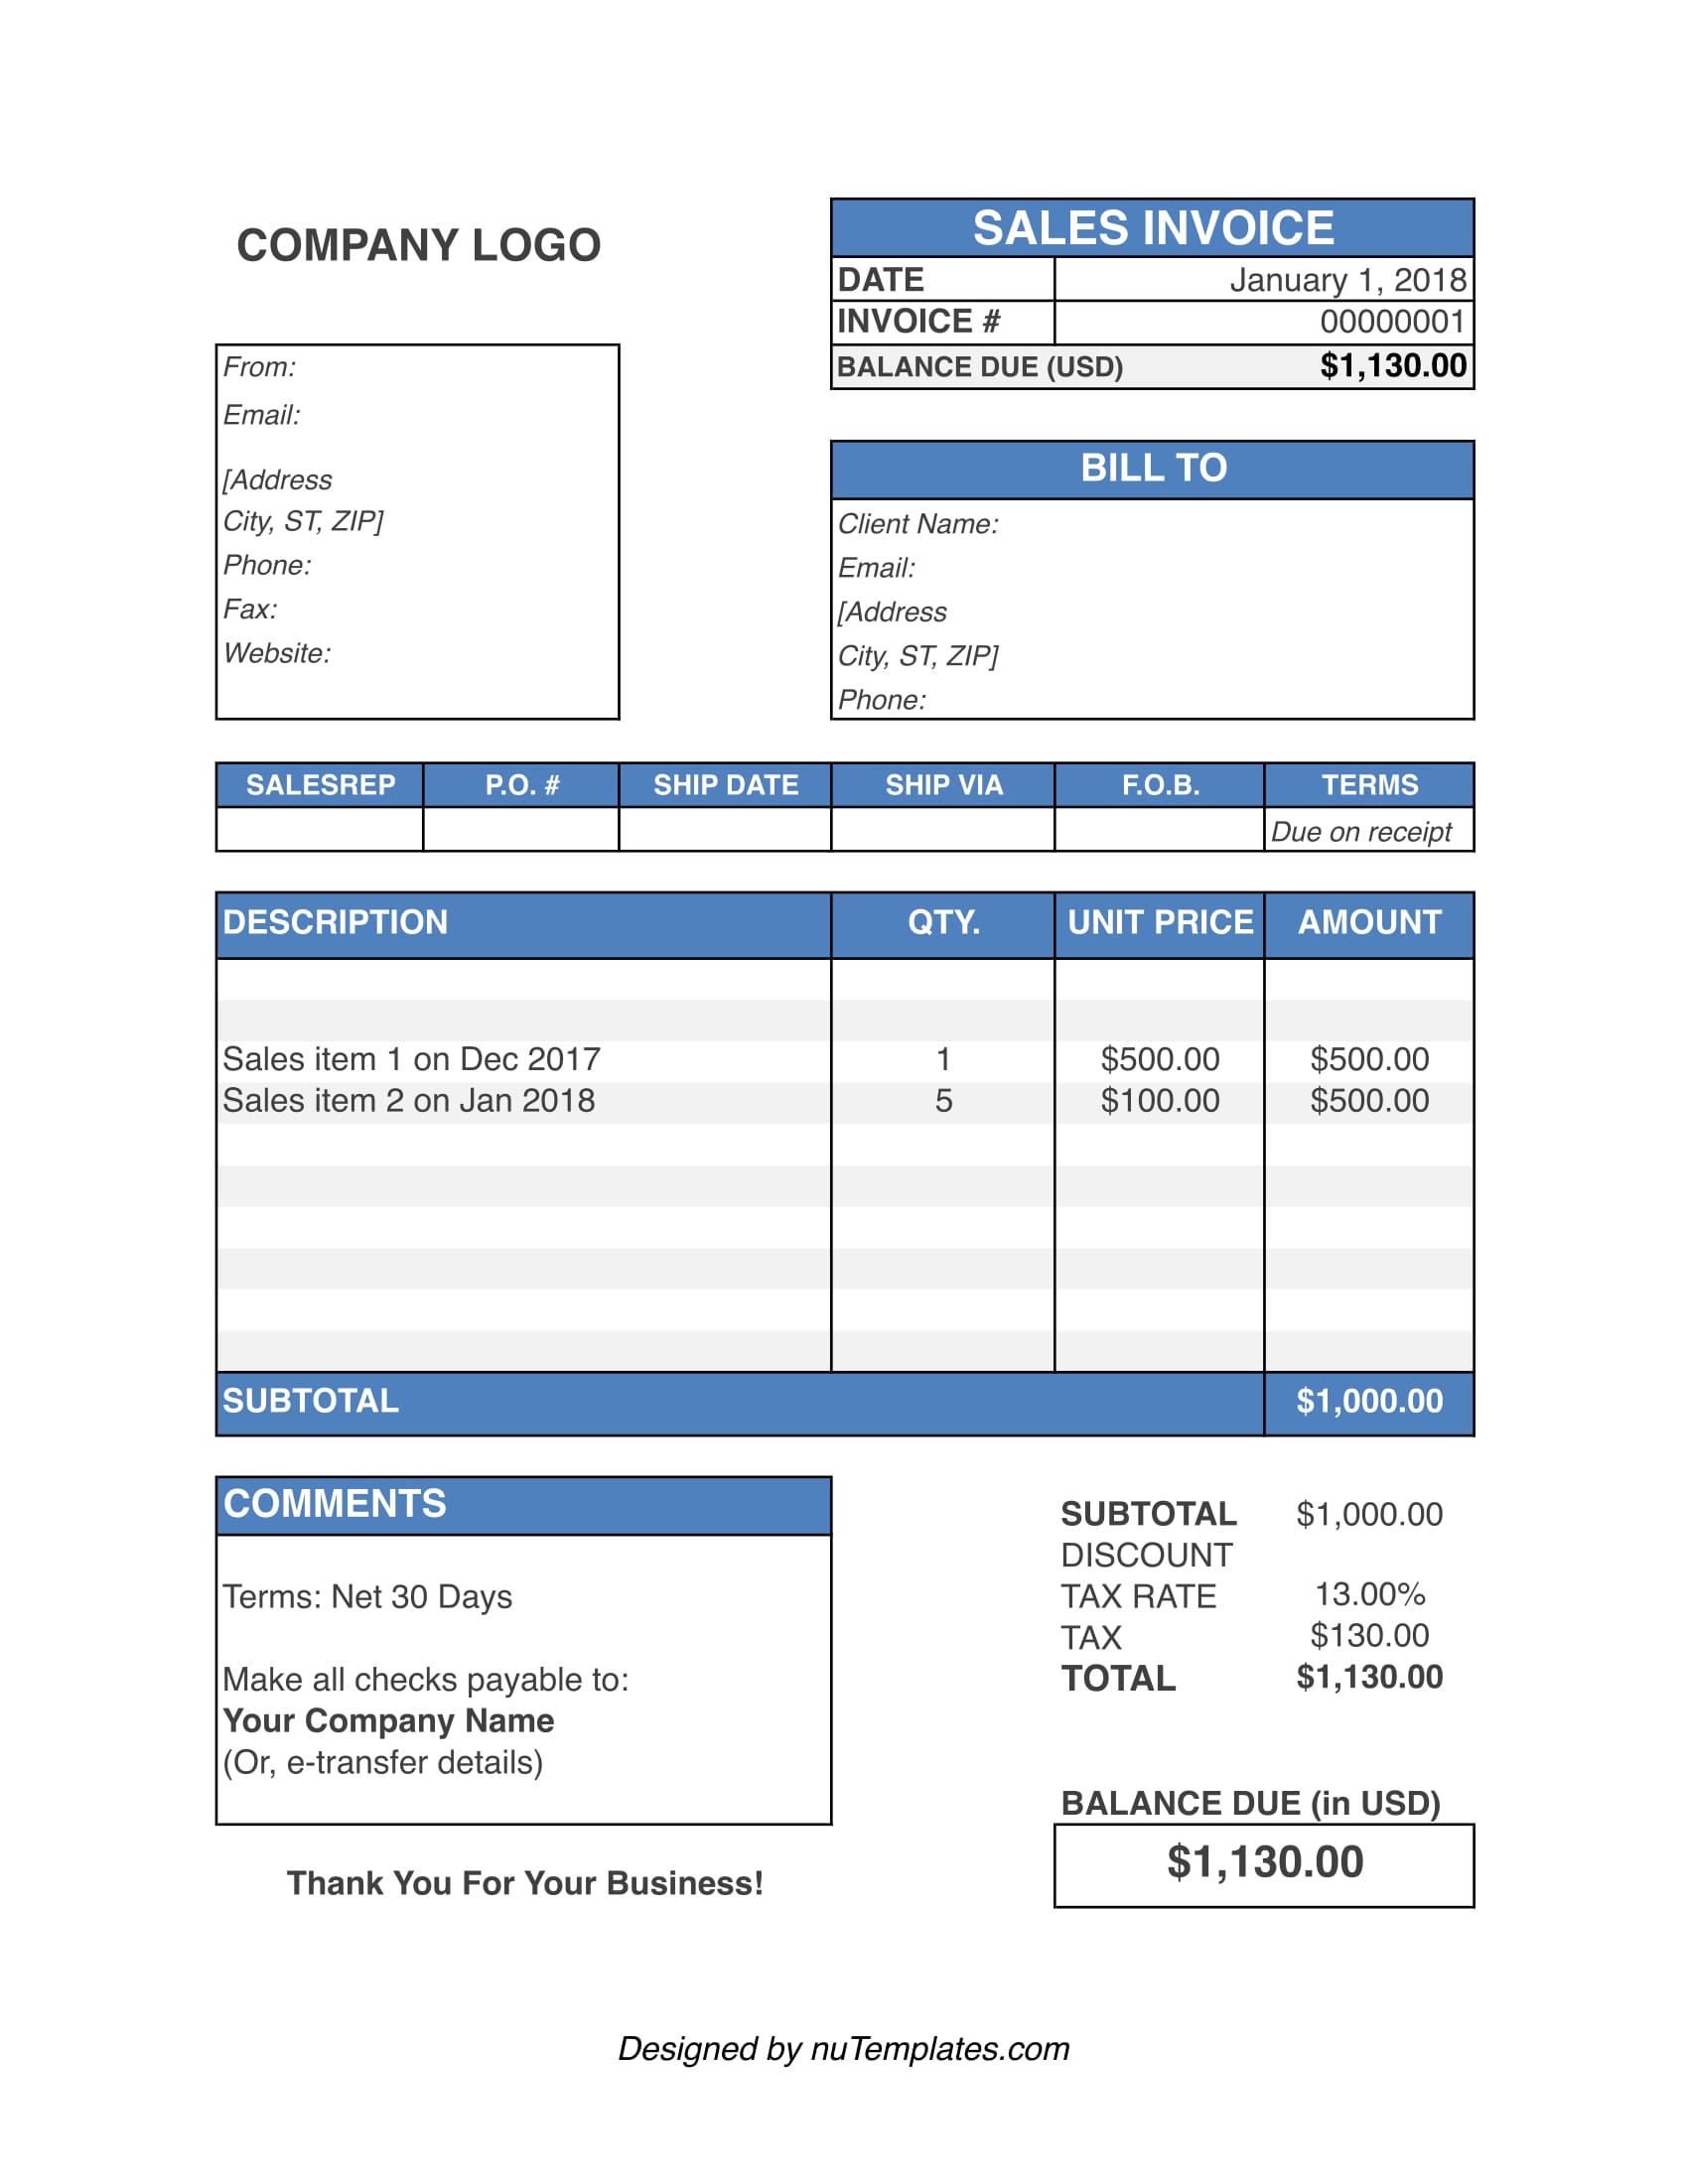 sales-invoice-template-sales-invoices-nutemplates